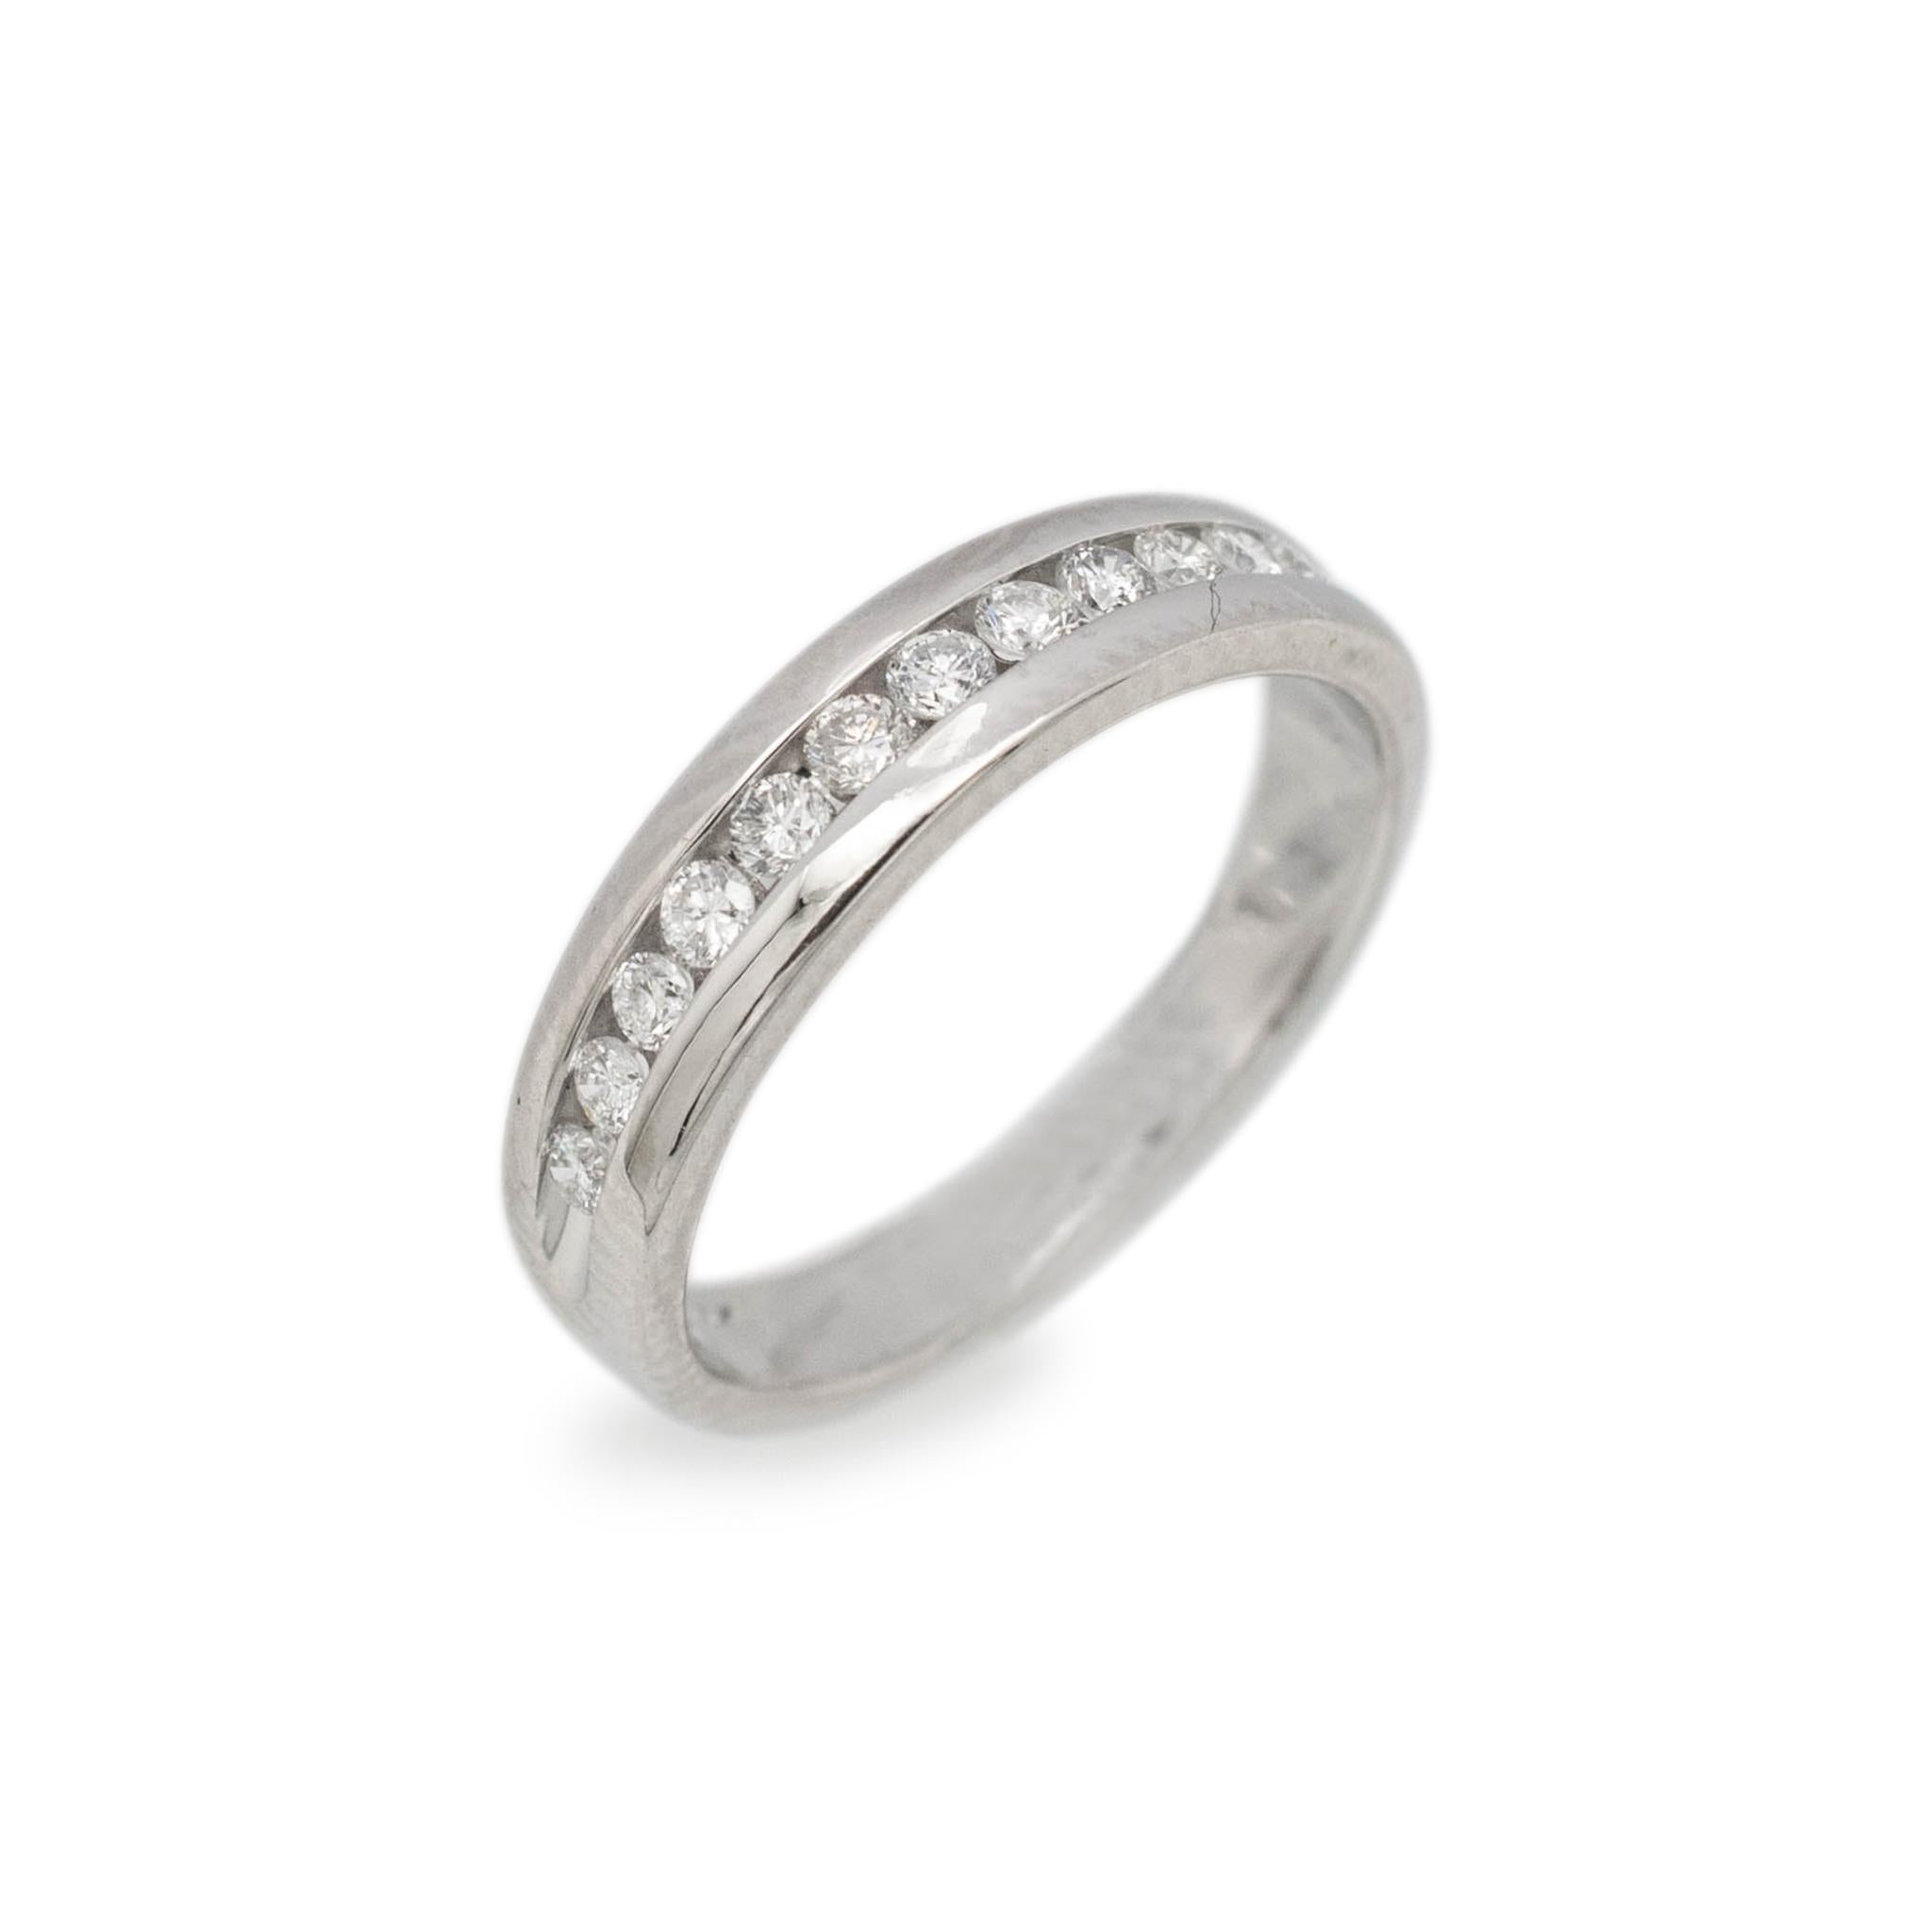 Gender: Ladies

Material: 14K White Gold

Size: 4.5

Shank Width: 4.15mm

Weight: 2.70 grams

Ladies 14K white gold diamond wedding band with a half-round shank. Engraved with 